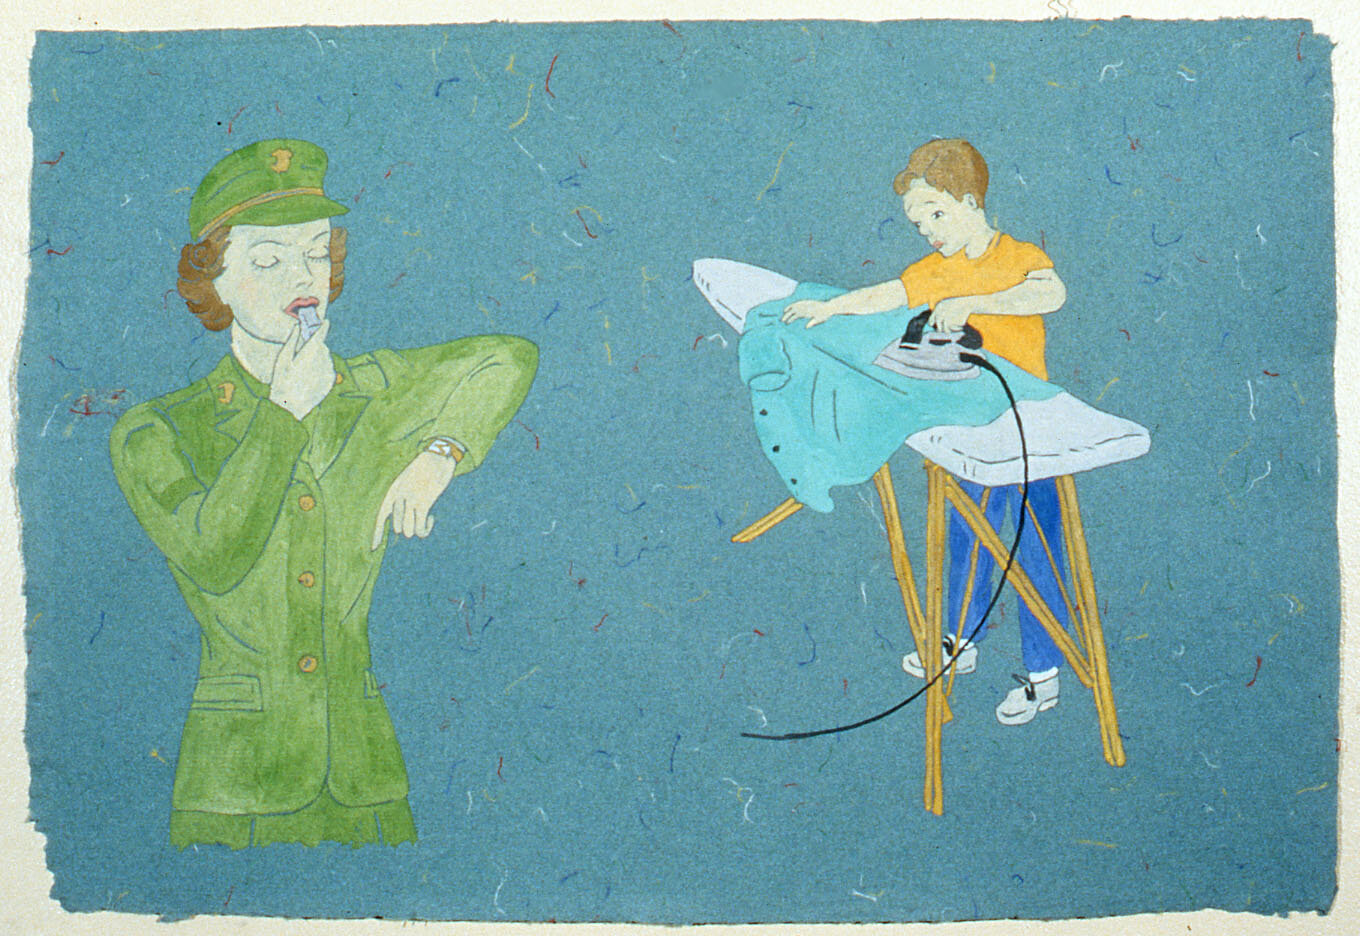   Boy Ironing   14”x21”  gouache on handmade paper  1991  PRIVATE COLLECTION 